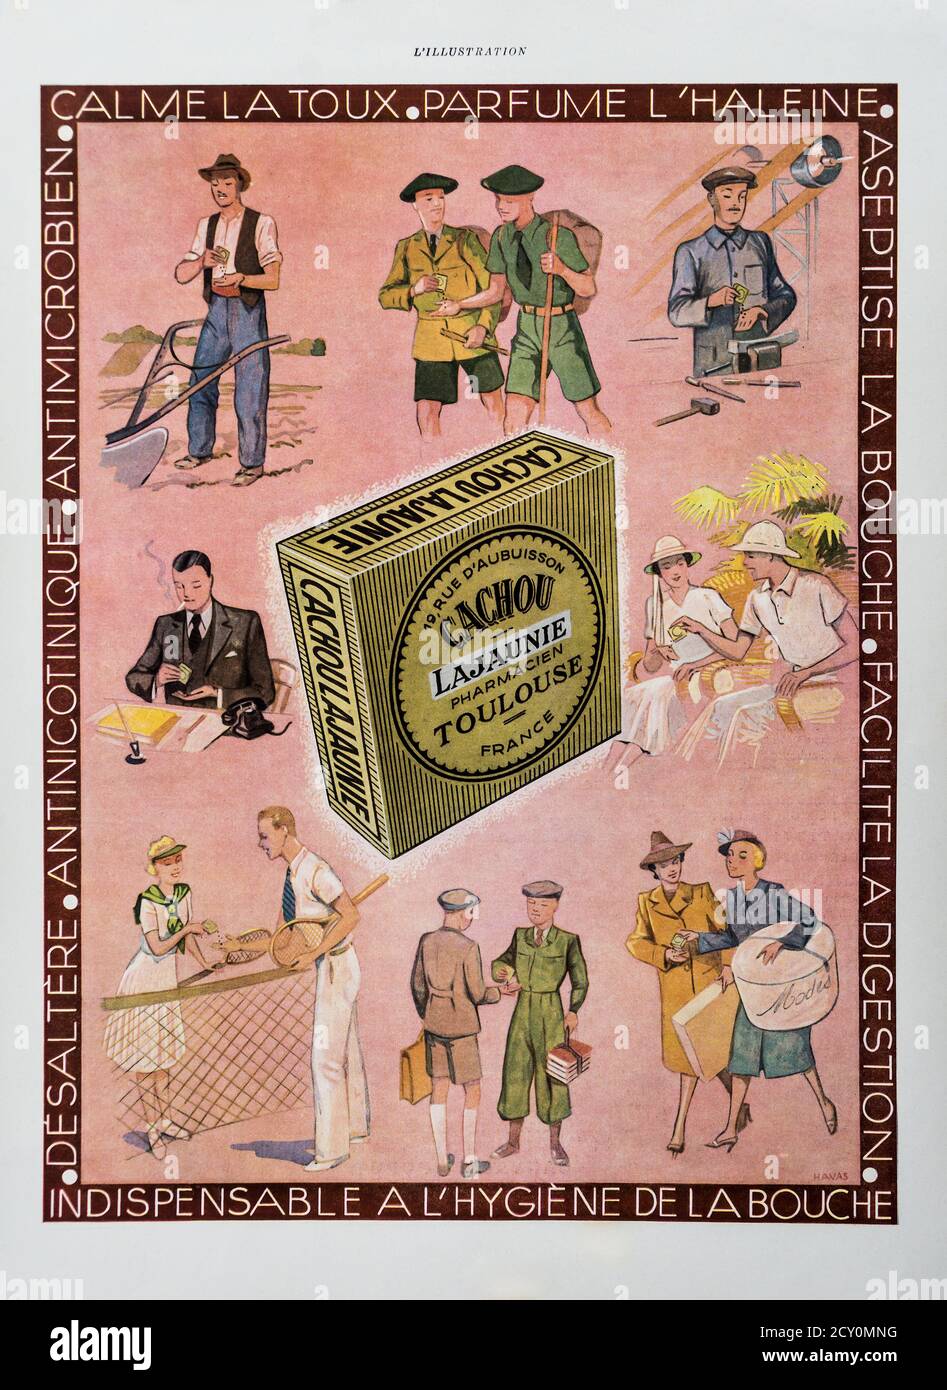 1930 advert for 'Cachou Lajaunie' clean breath tablets from the French 'l'Illustration' magazine. Stock Photo